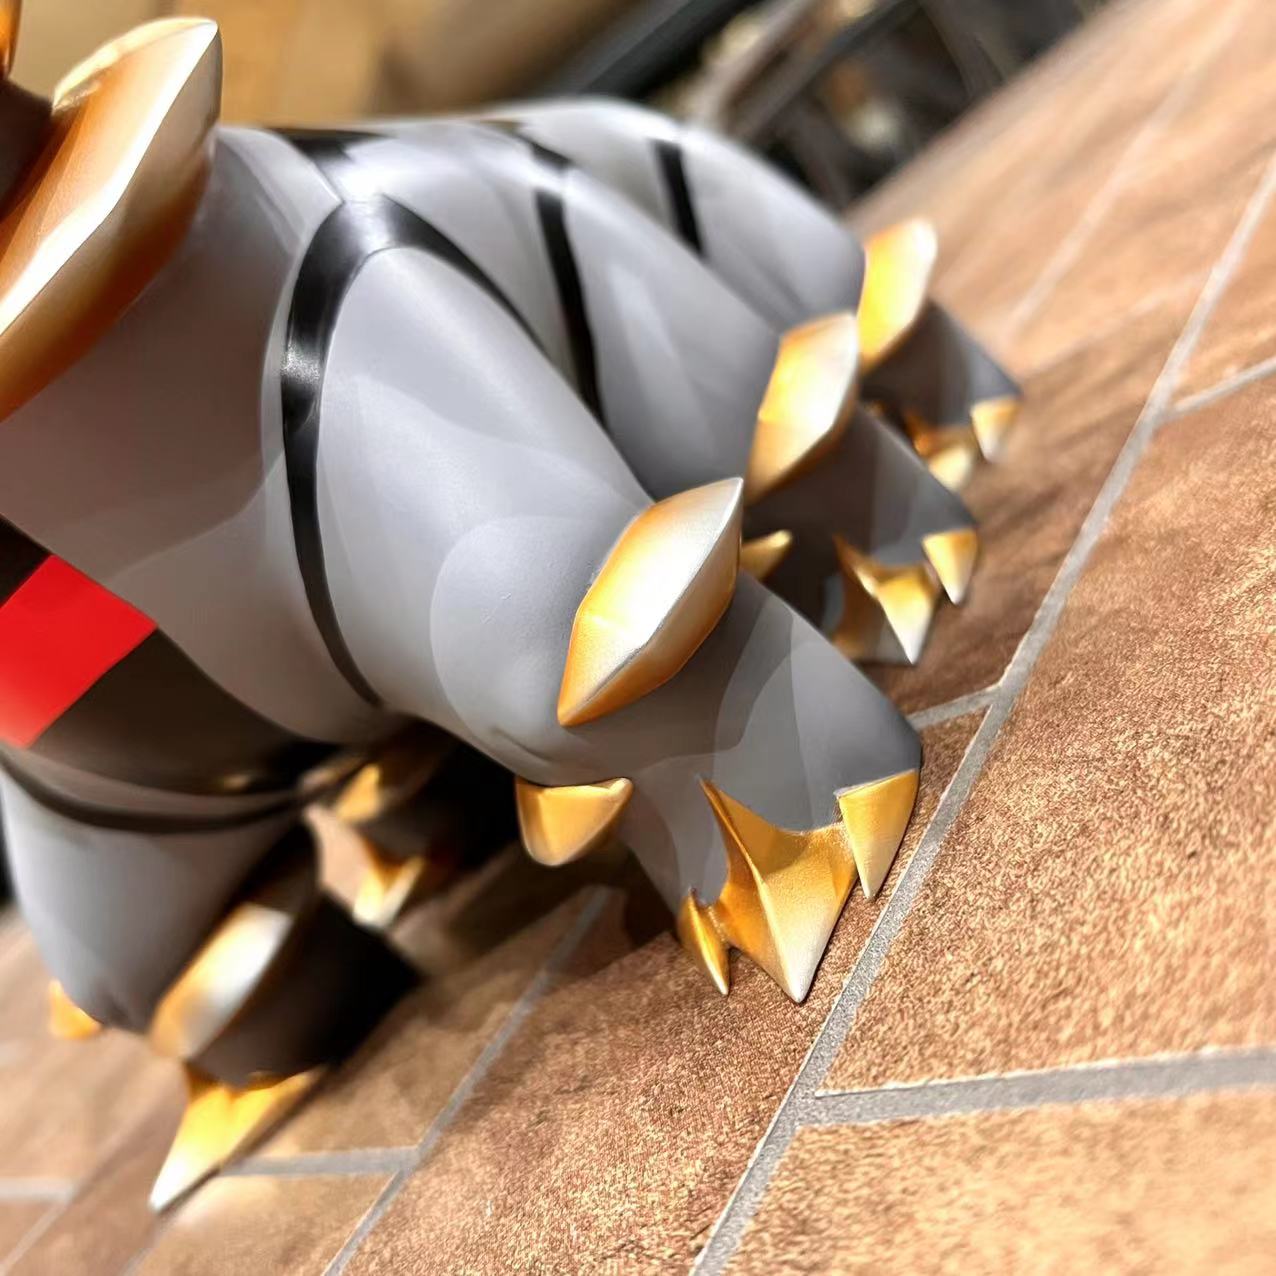 [PREORDER CLOSED] 1/20 Scale World Figure [KING] - Giratina (Altered Forme)